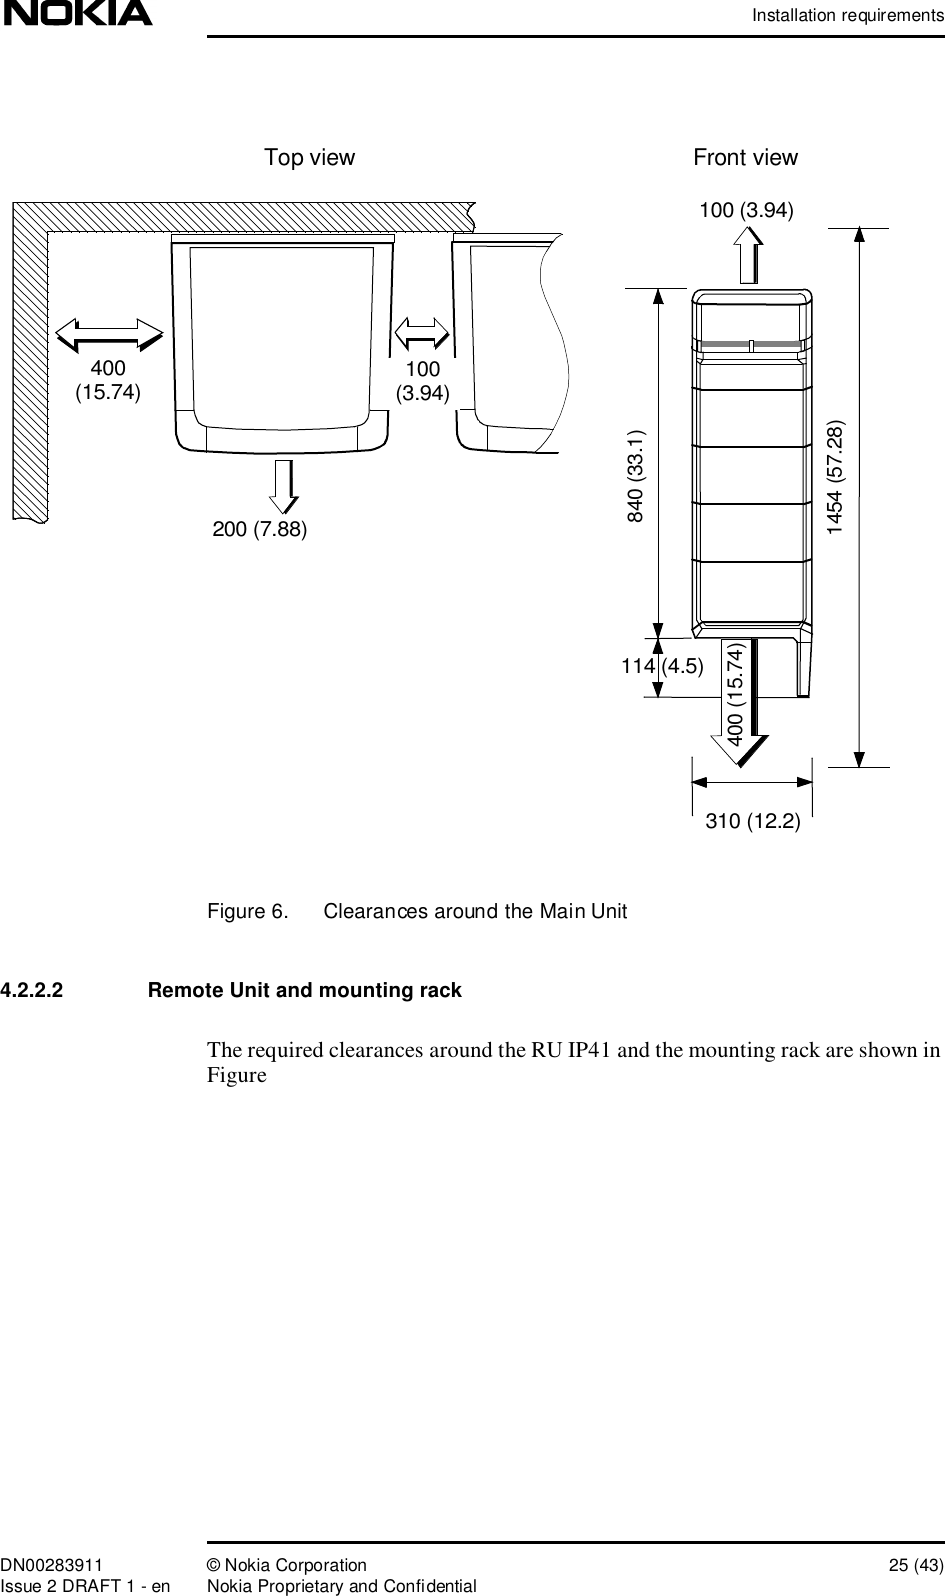 Installation requirementsDN00283911 © Nokia Corporation 25 (43)Issue 2 DRAFT 1 - en Nokia Proprietary and ConfidentialFigure 6.  Clearances around the Main Unit4.2.2.2  Remote Unit and mounting rackThe required clearances around the RU IP41 and the mounting rack are shown in Figure Front view200 (7.88)400(15.74)840 (33.1)310 (12.2)100 (3.94)Top view1454 (57.28)100(3.94)114 (4.5)400 (15.74)